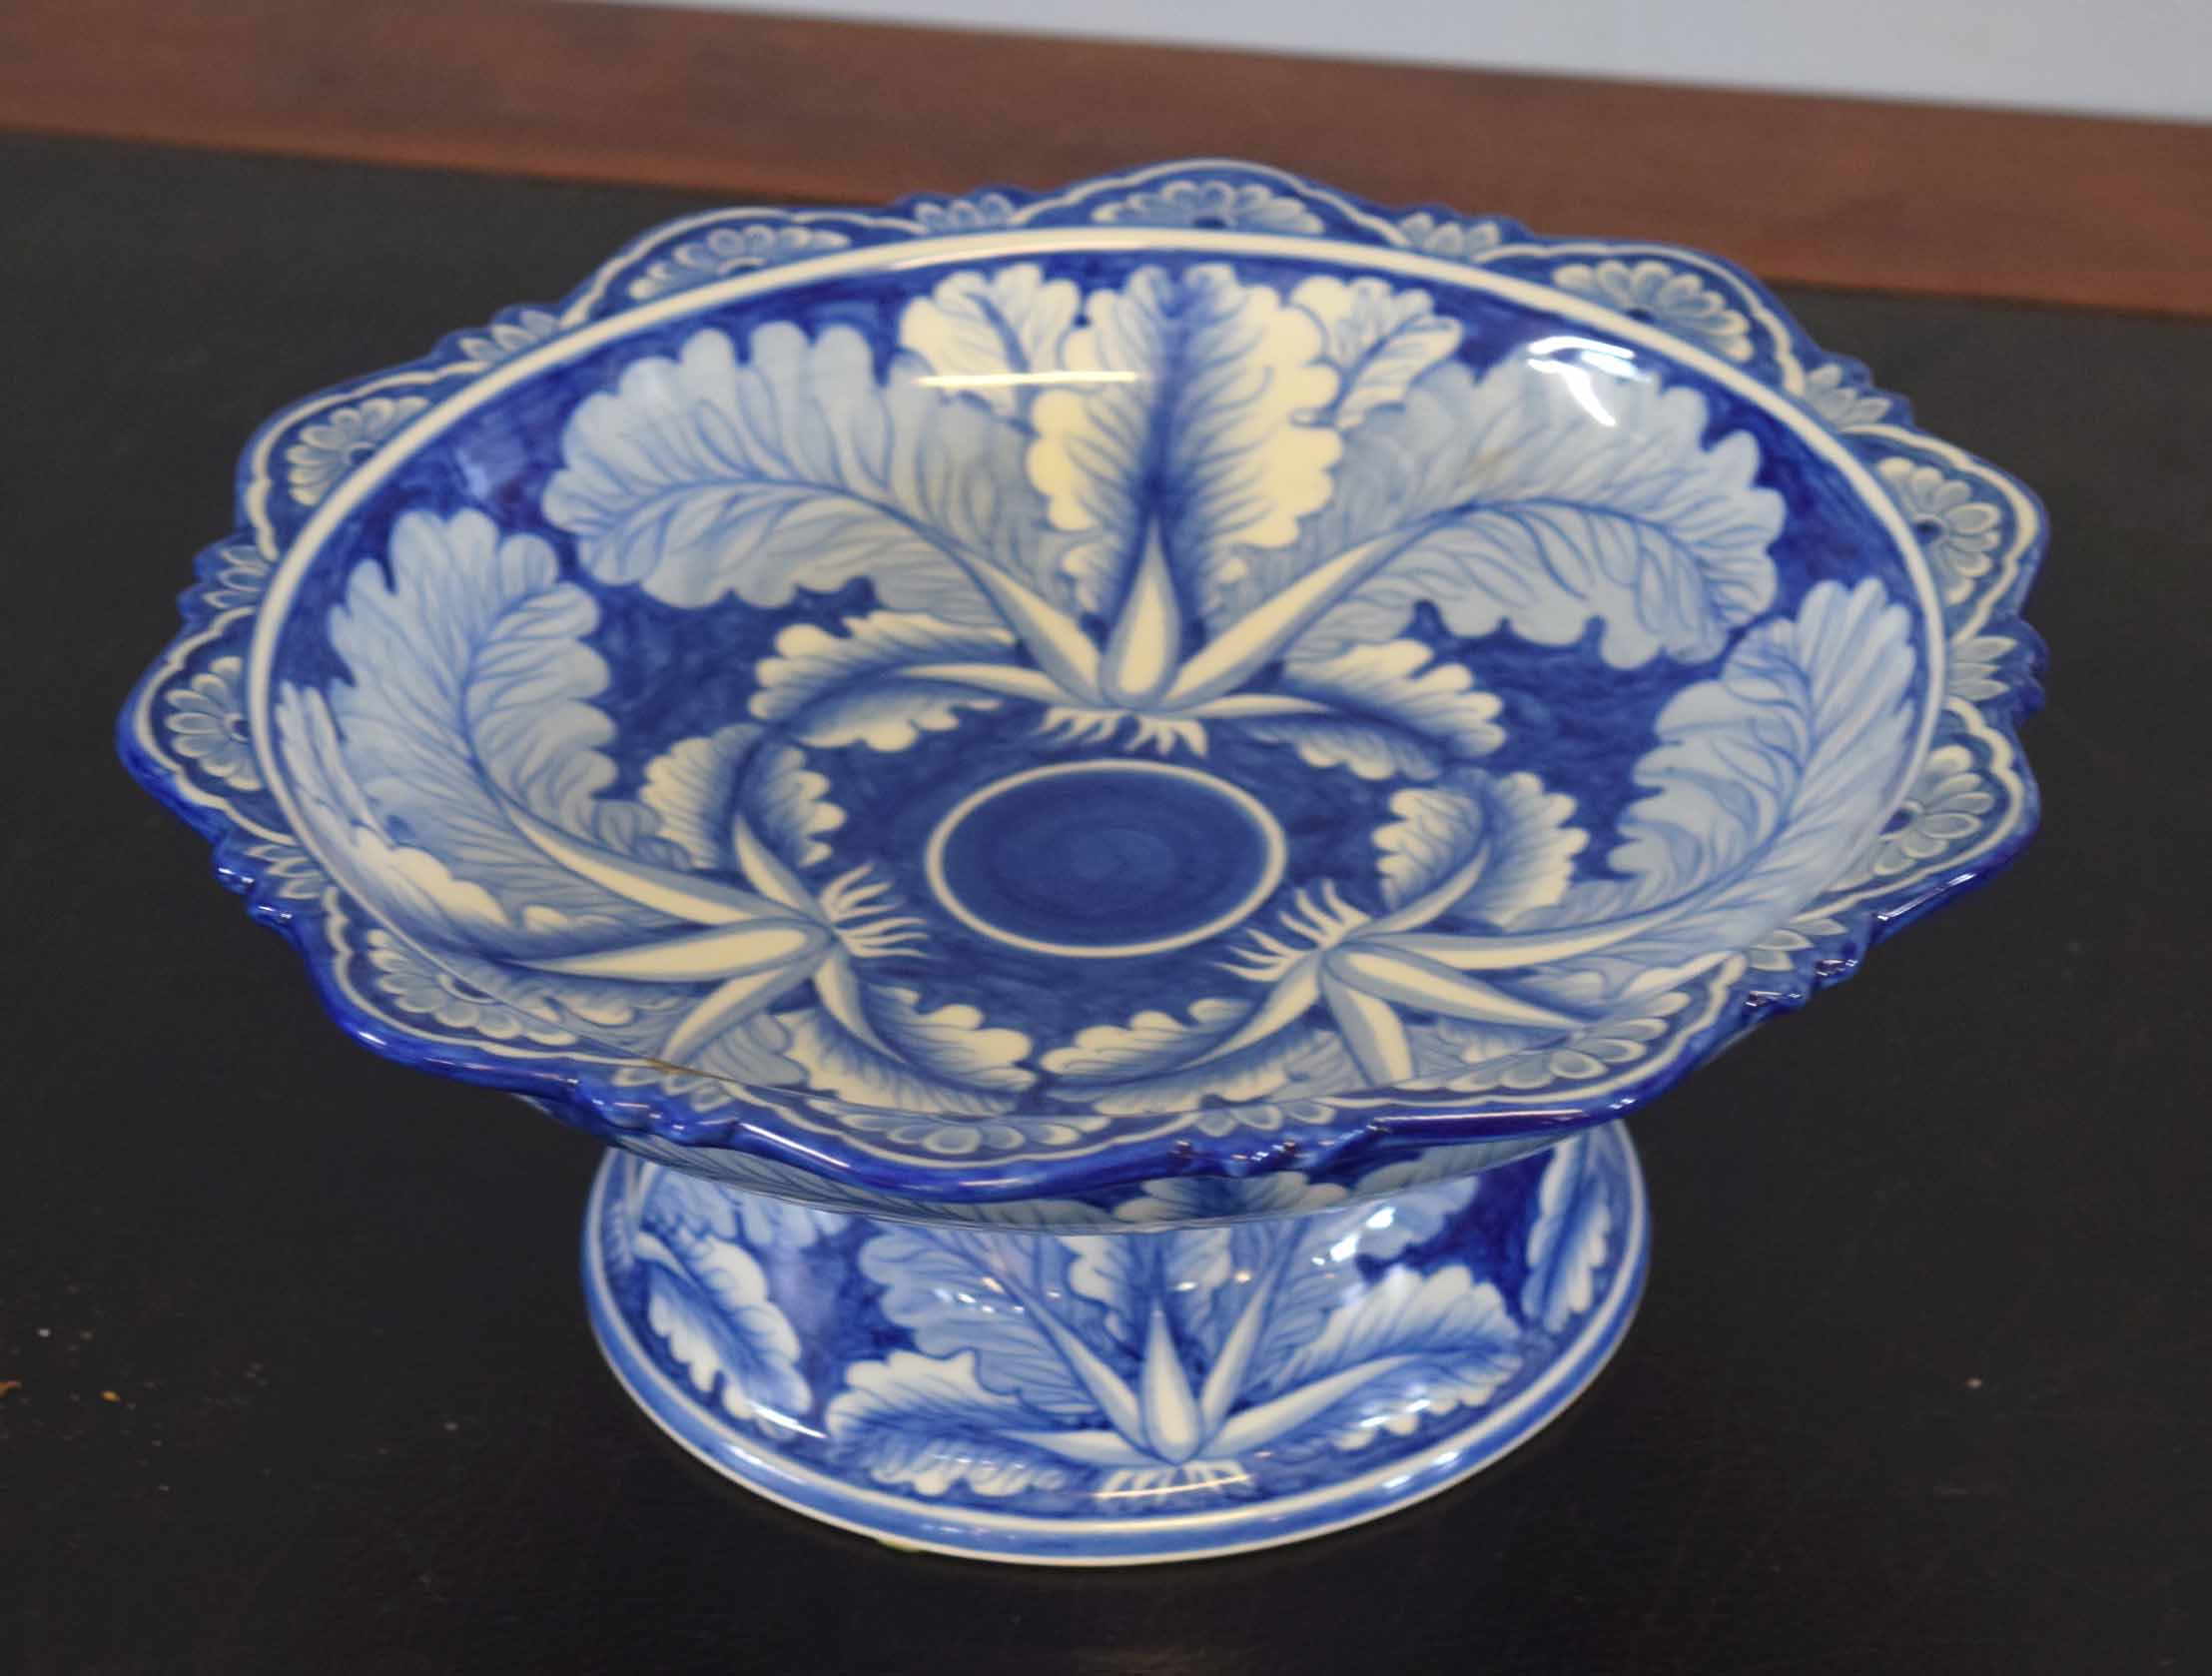 Pottery tazza decorated in a flow blue design with flowers